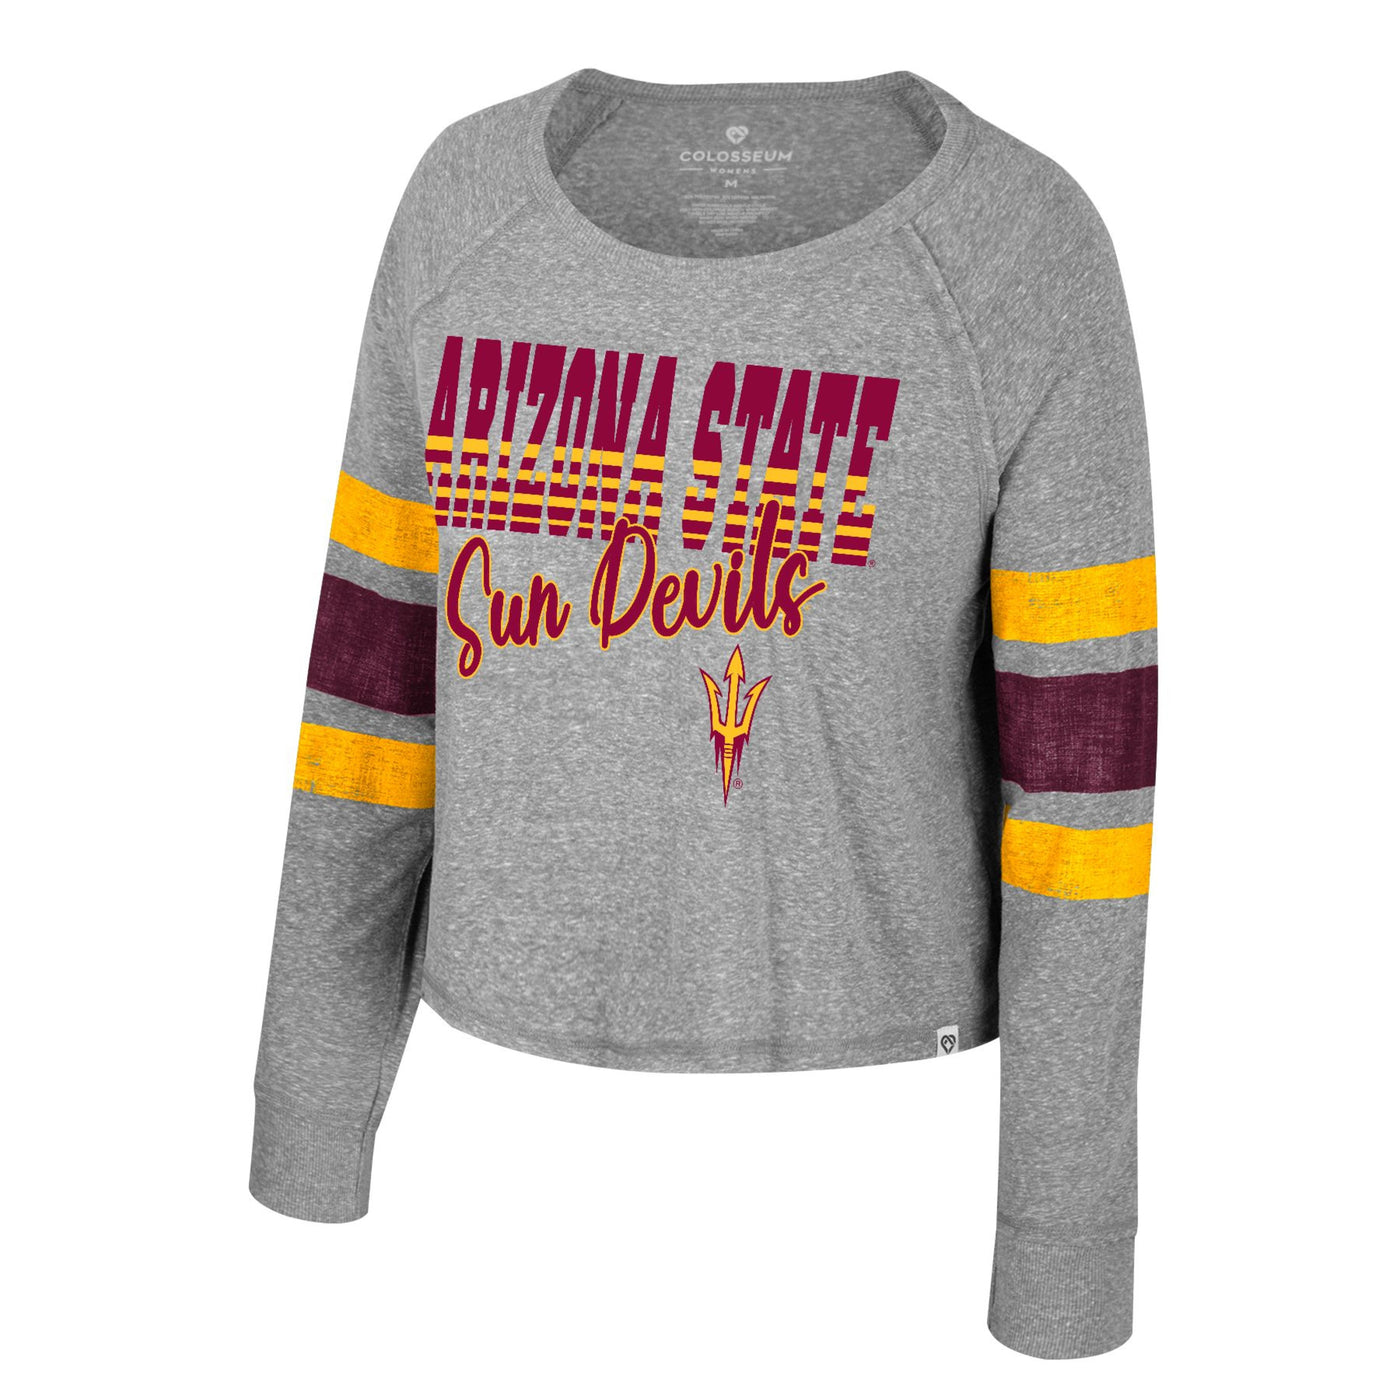 ASU grey long sleeve crop top with three stripes on each arm in the colors gold maroon and gold. on the chest is the text 